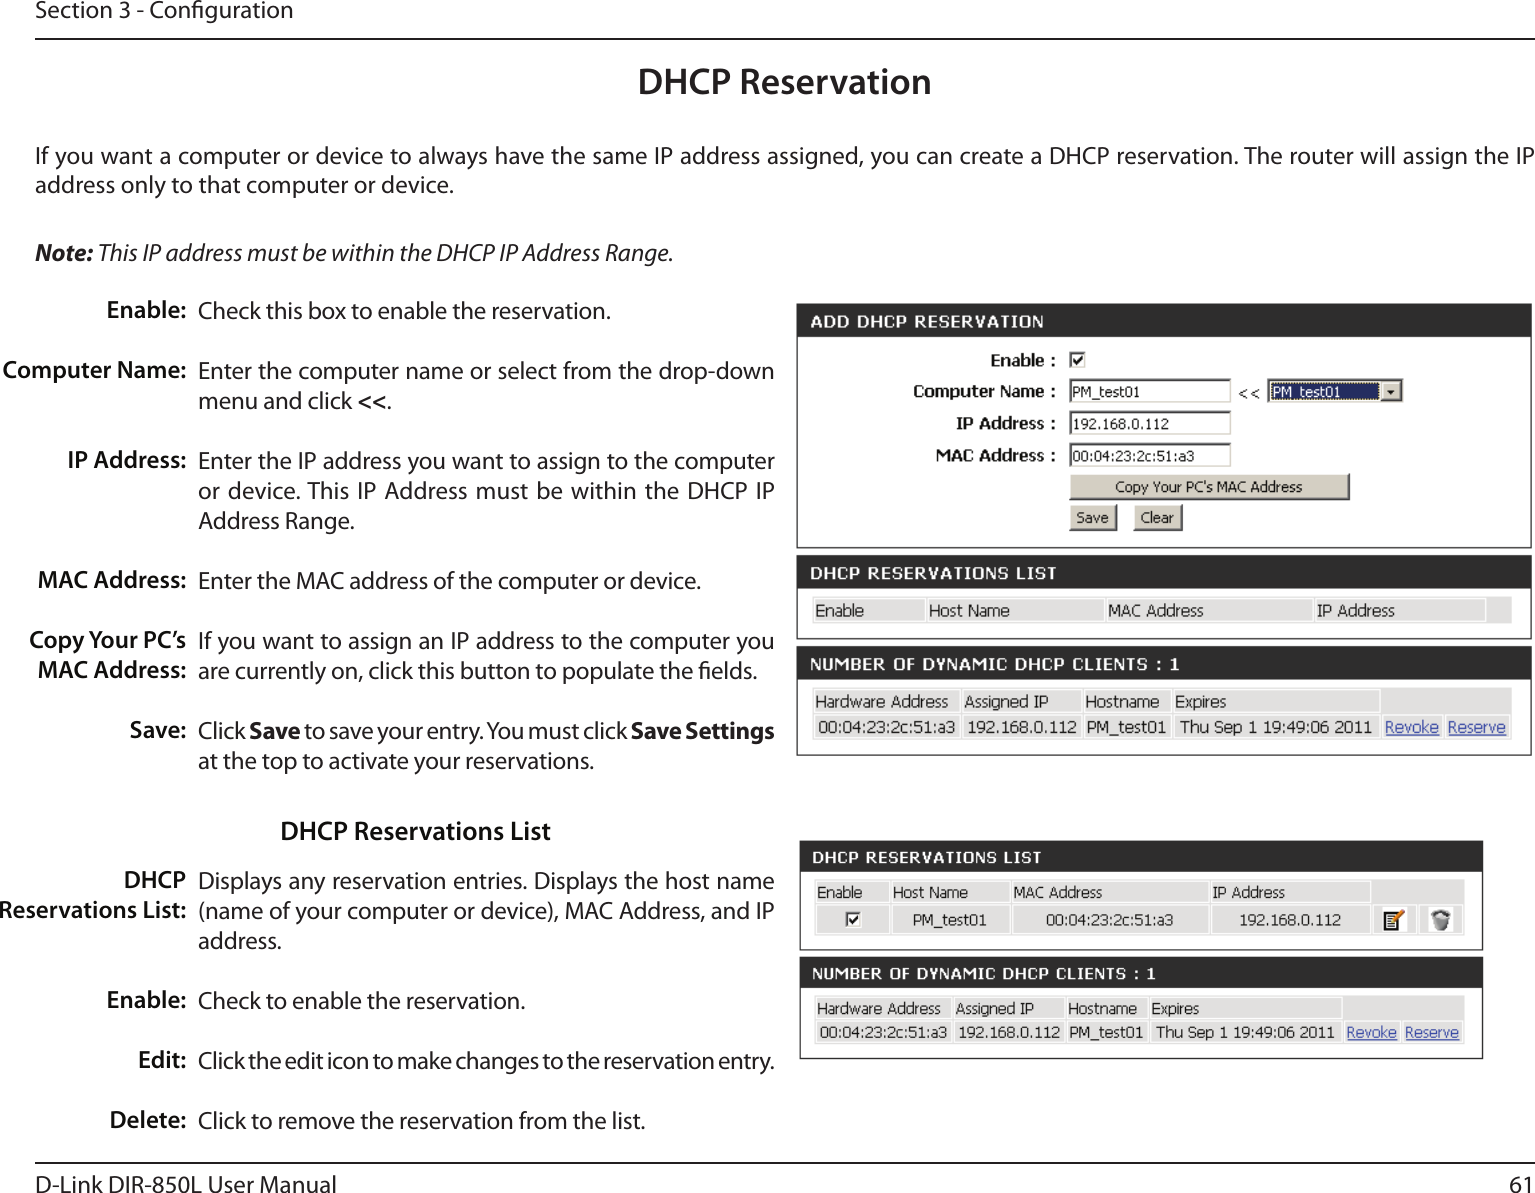 61D-Link DIR-850L User ManualSection 3 - CongurationDHCP ReservationIf you want a computer or device to always have the same IP address assigned, you can create a DHCP reservation. The router will assign the IP address only to that computer or device. Note: This IP address must be within the DHCP IP Address Range.Check this box to enable the reservation.Enter the computer name or select from the drop-down menu and click &lt;&lt;.Enter the IP address you want to assign to the computer or device. This IP Address must  be within the DHCP IP Address Range.Enter the MAC address of the computer or device.If you want to assign an IP address to the computer you are currently on, click this button to populate the elds. Click Save to save your entry. You must click Save Settings at the top to activate your reservations. Displays any reservation entries. Displays the host name (name of your computer or device), MAC Address, and IP address.Check to enable the reservation.Click the edit icon to make changes to the reservation entry.Click to remove the reservation from the list.Enable:Computer Name:IP Address:MAC Address:Copy Your PC’s MAC Address:Save:DHCP Reservations List:Enable:Edit:Delete:DHCP Reservations List